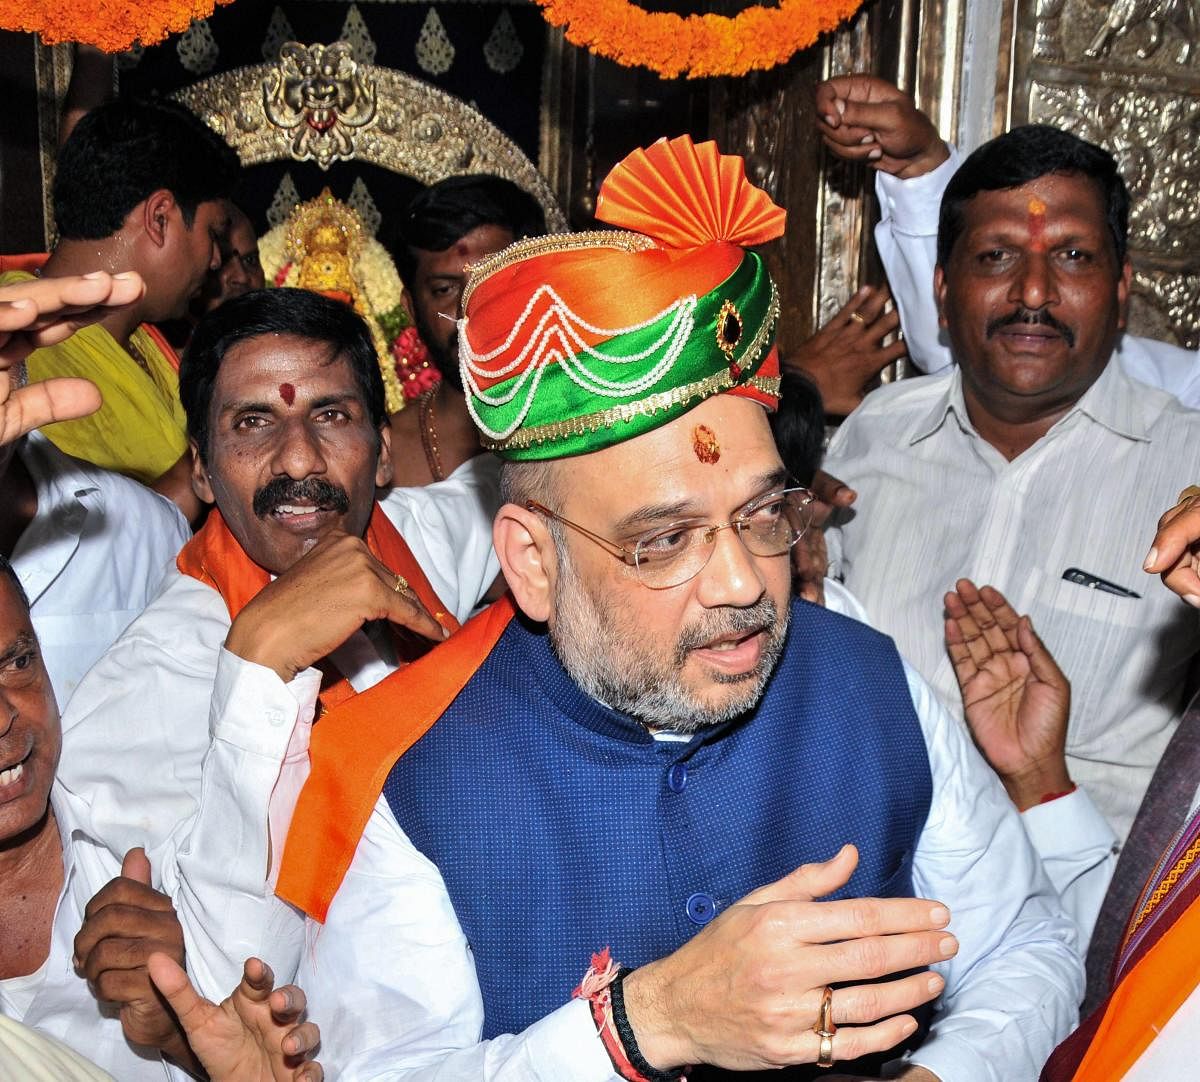 BJP National president Amit Shah arrives to offer prayers at Lal Darwaja Temple, in Hyderabad on Saturday. PTI